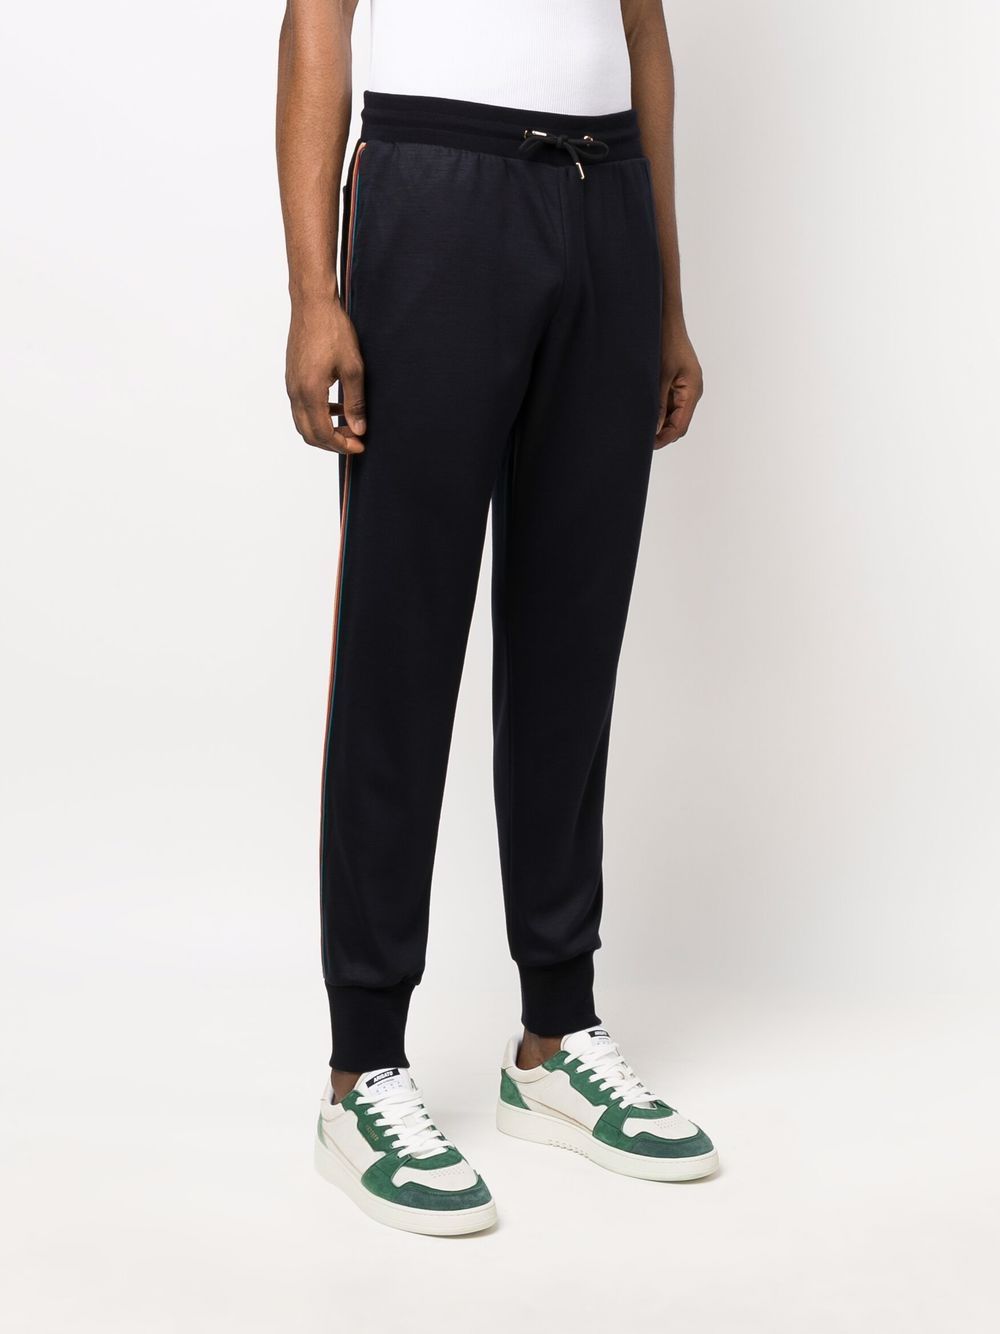 Paul Smith side-stripe Tapered Track Pants - Farfetch